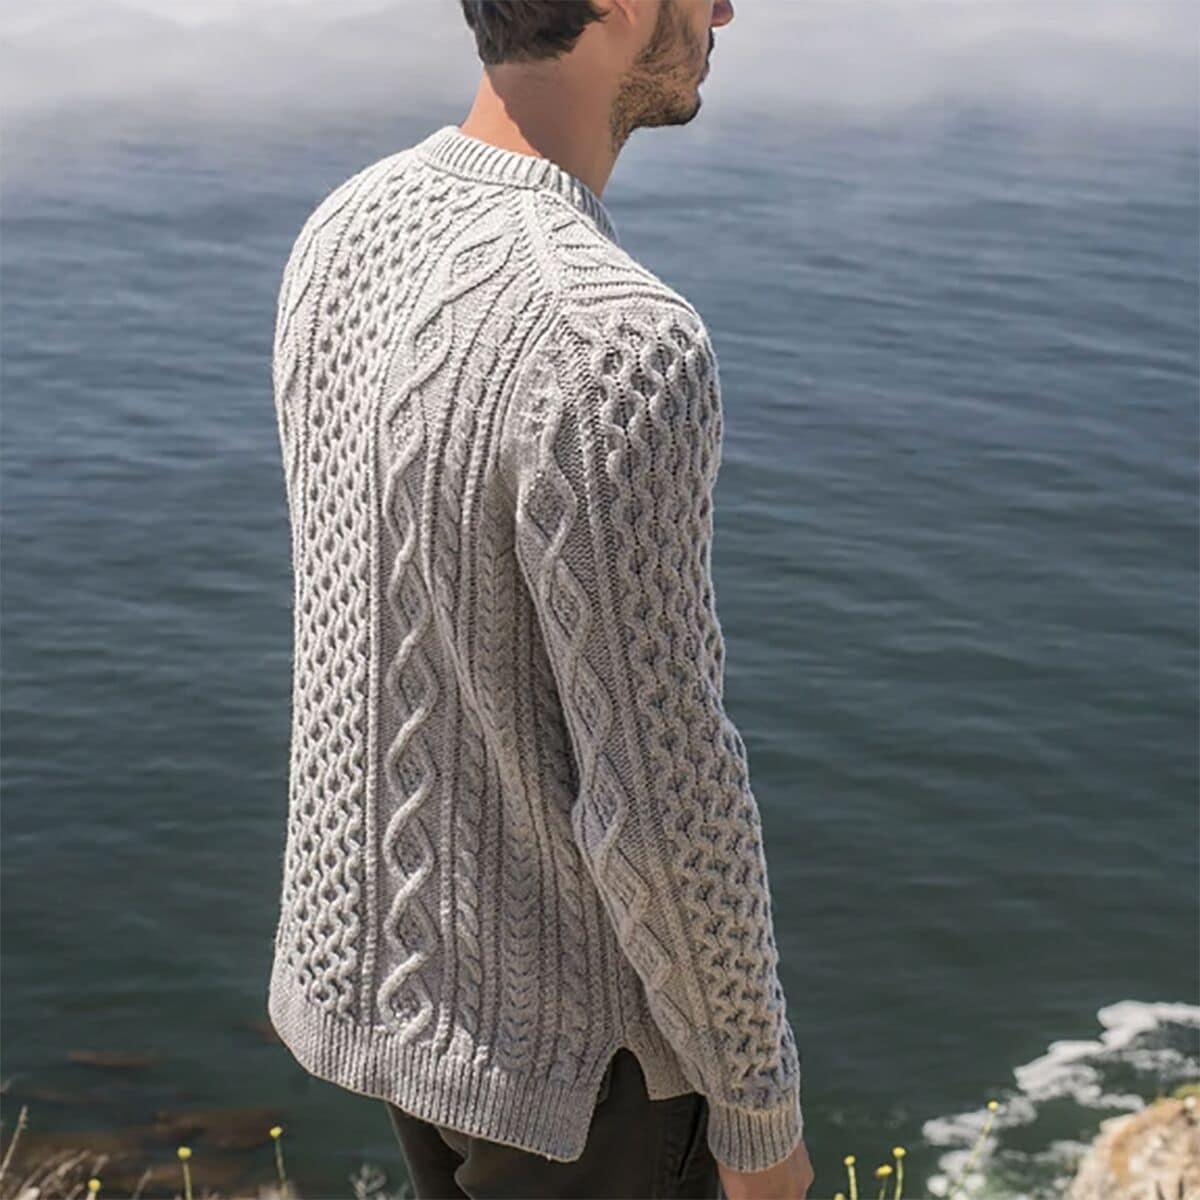 Outerknown Fisherman Sweater - Men's - Clothing